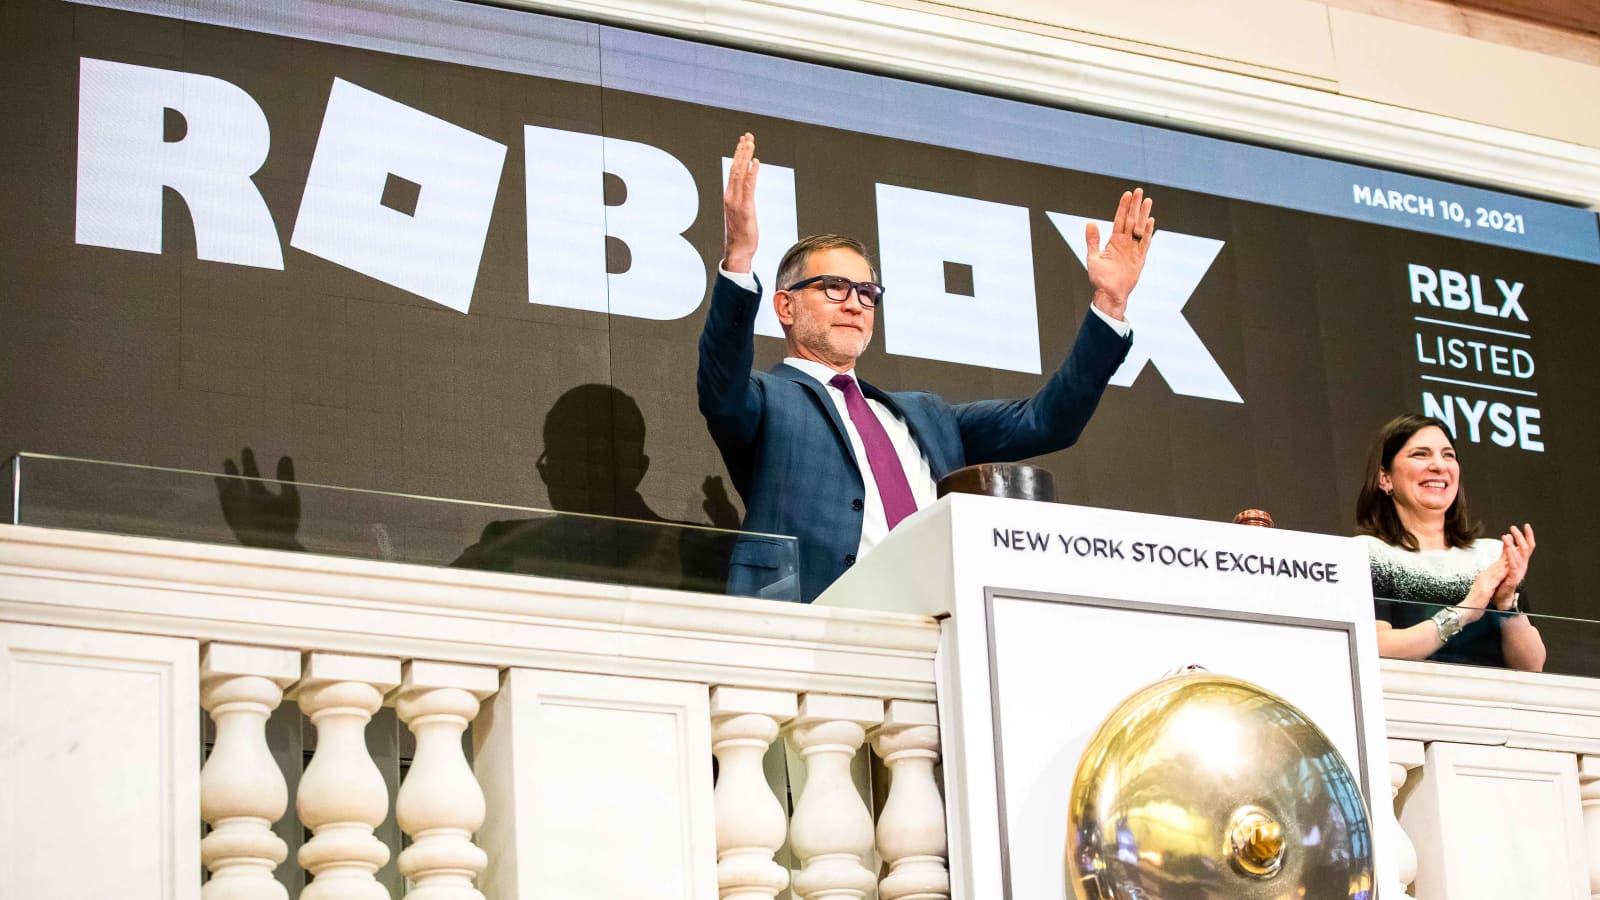 RBLX - Roblox Corporation - Class A Stock - Stock Price, Institutional  Ownership, Shareholders (NYSE)